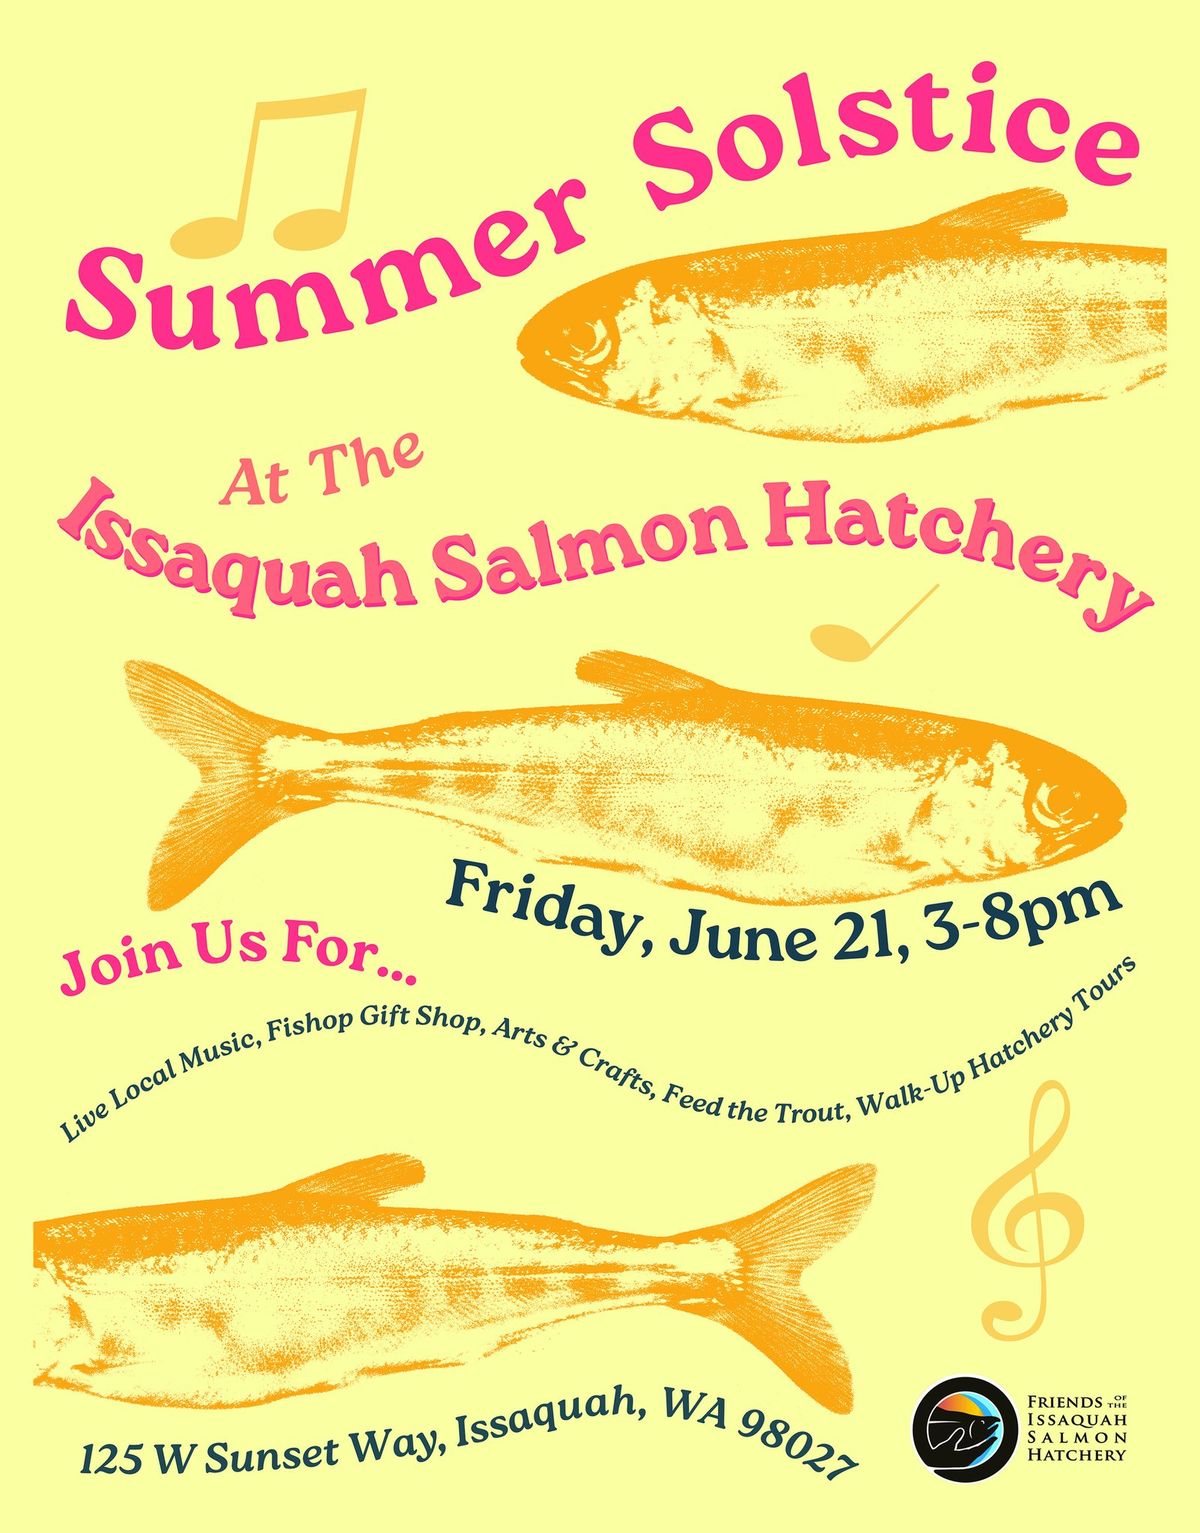 Summer Solstice at the Hatchery